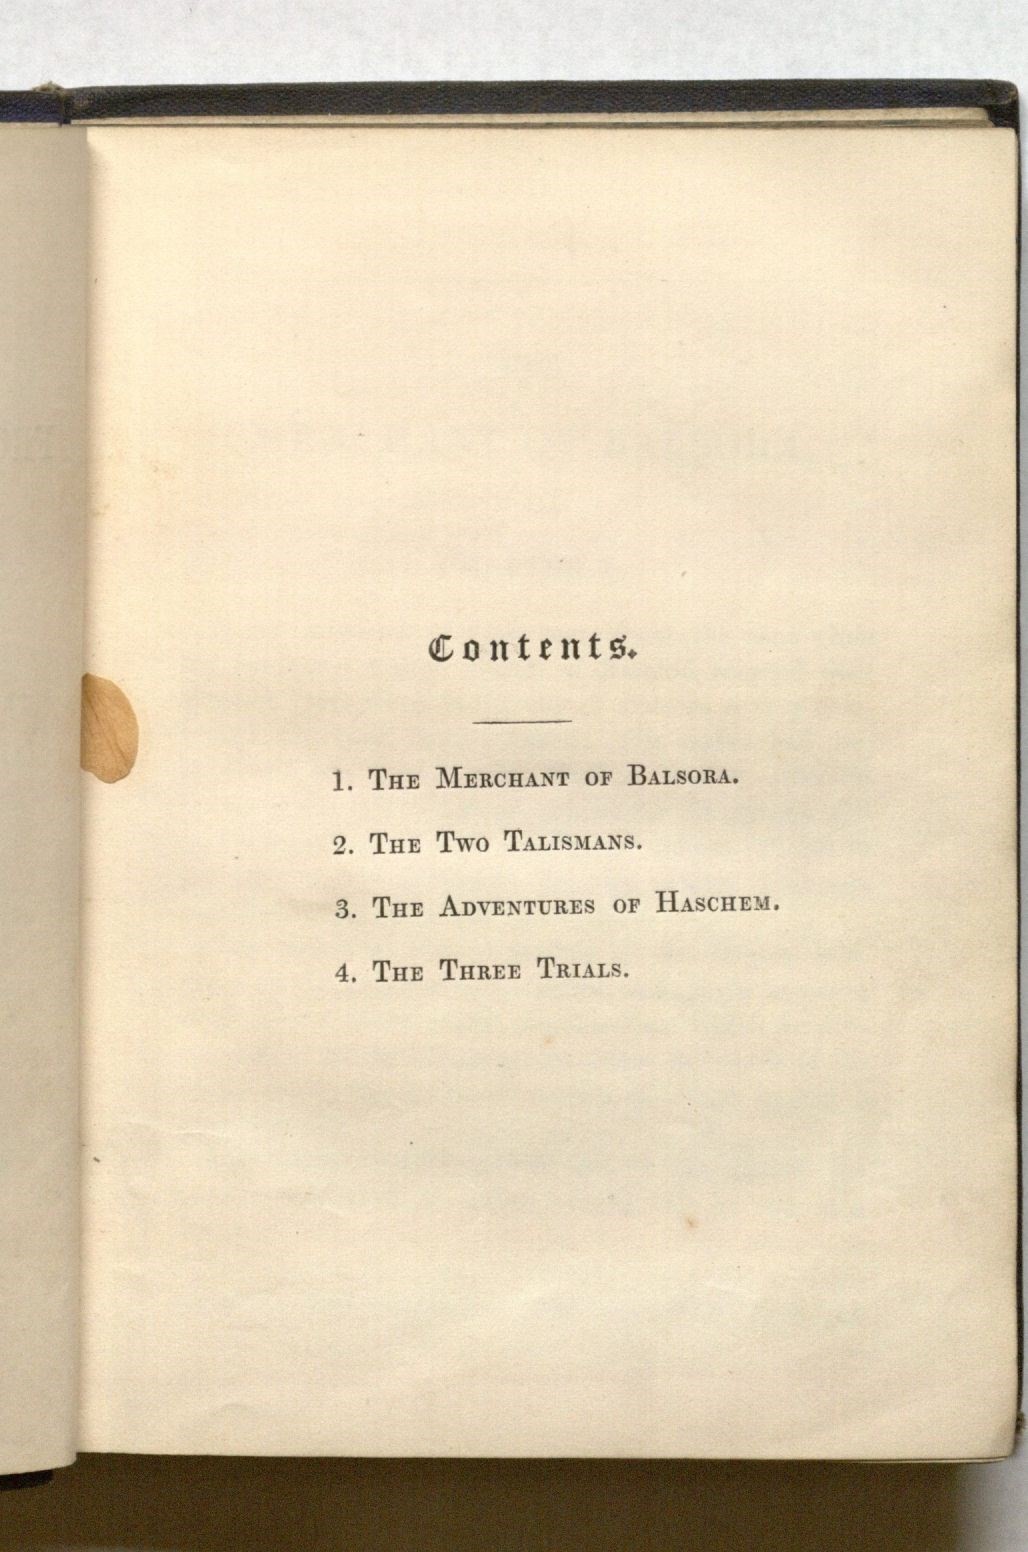 Table of Contents of Grimm's Tales from the Eastern-Land